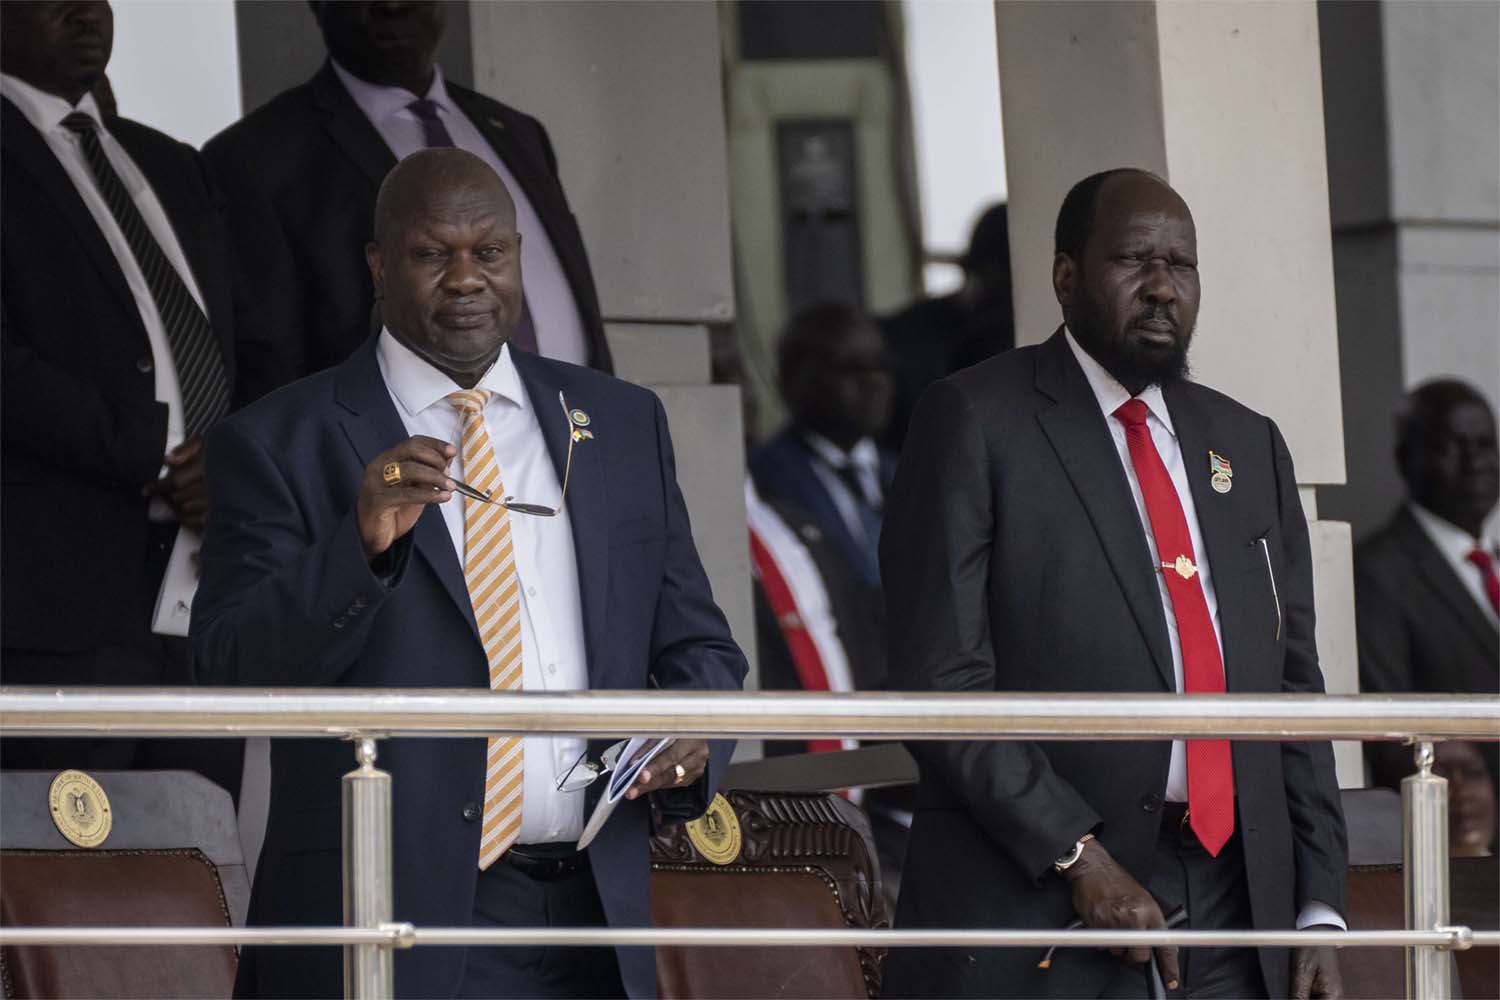 In Friday's decree, Kiir handed the defence ministry to his party